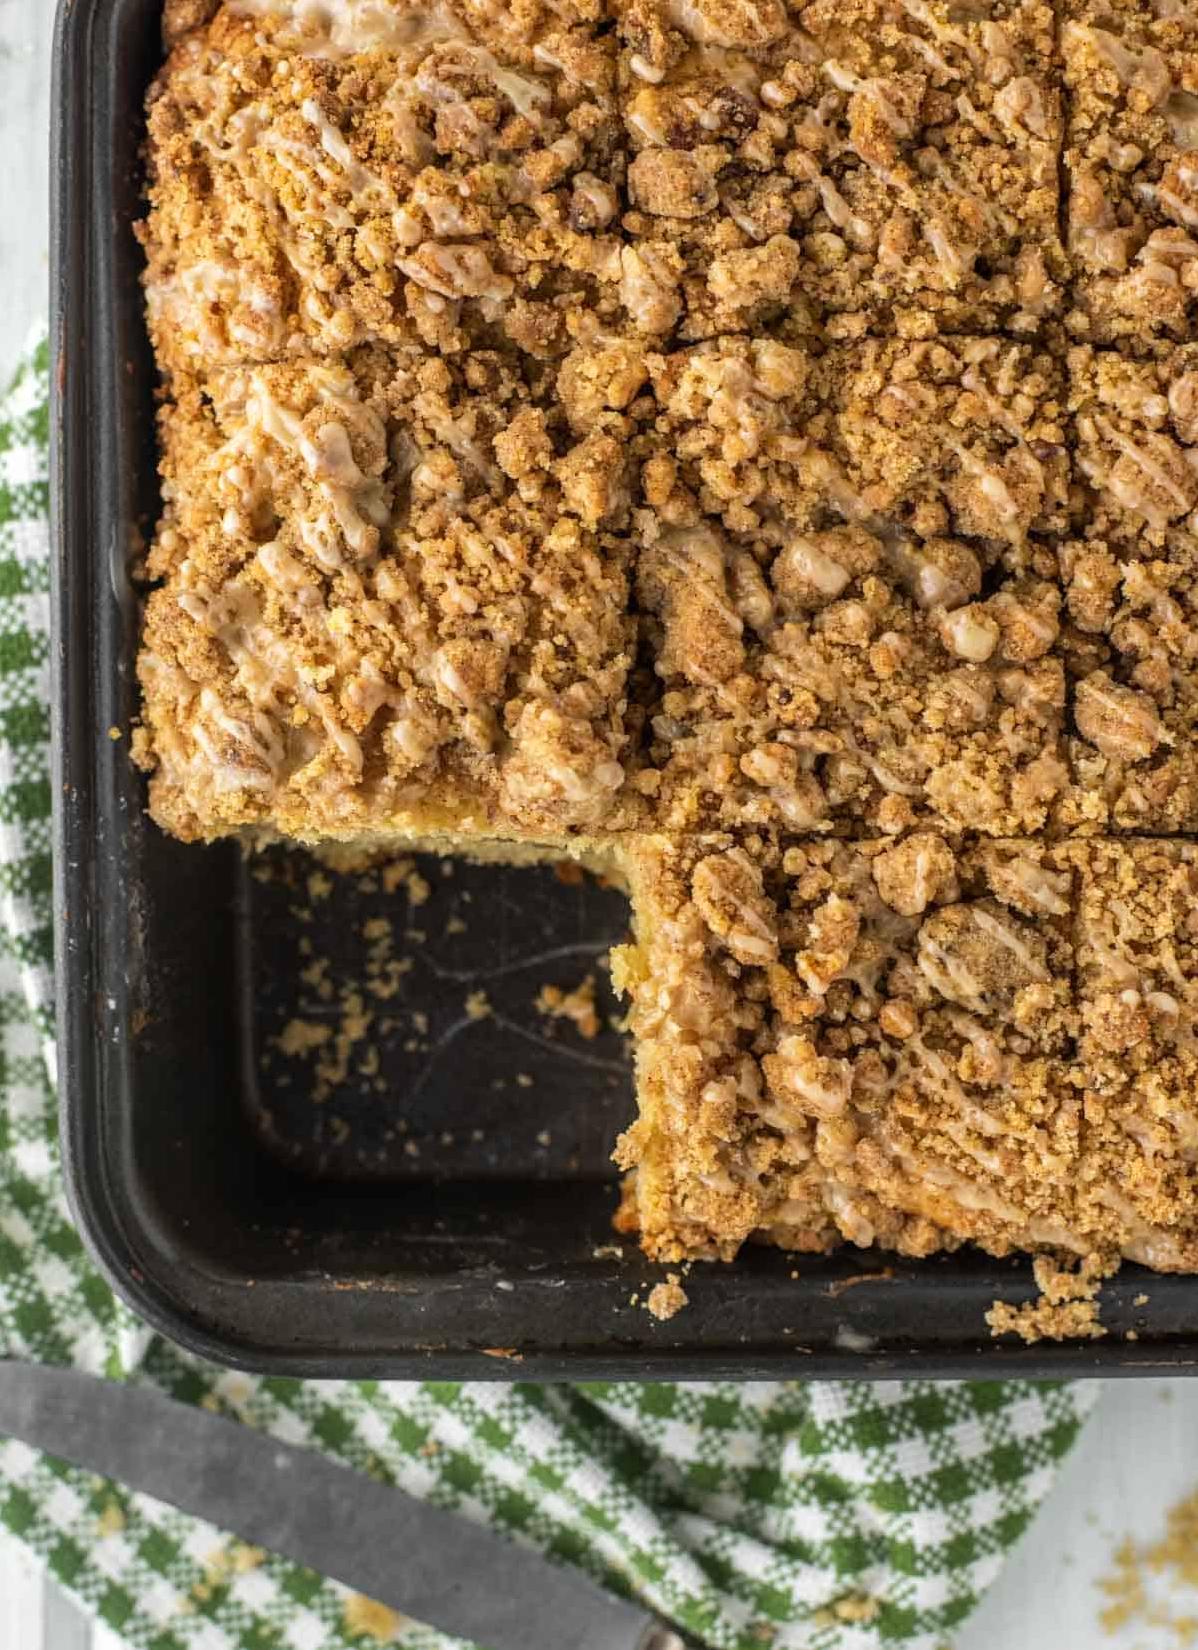  This delicious coffee cake pairs perfectly with a hot cup of Irish coffee on a chilly morning.